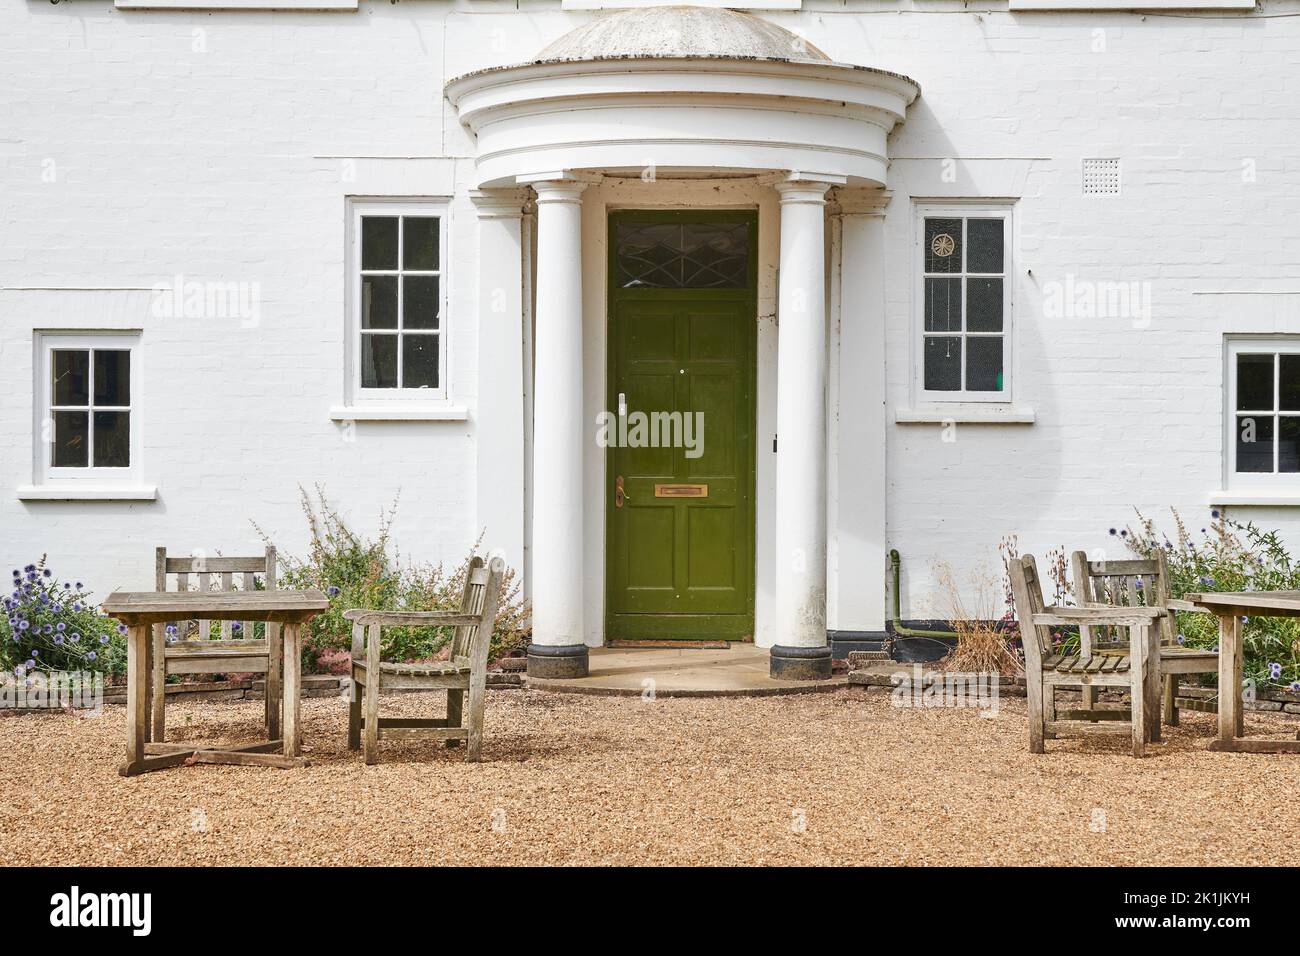 Picnic tables and chairs outside a house in the botanic garden at the University of Cambridge, England. Stock Photo